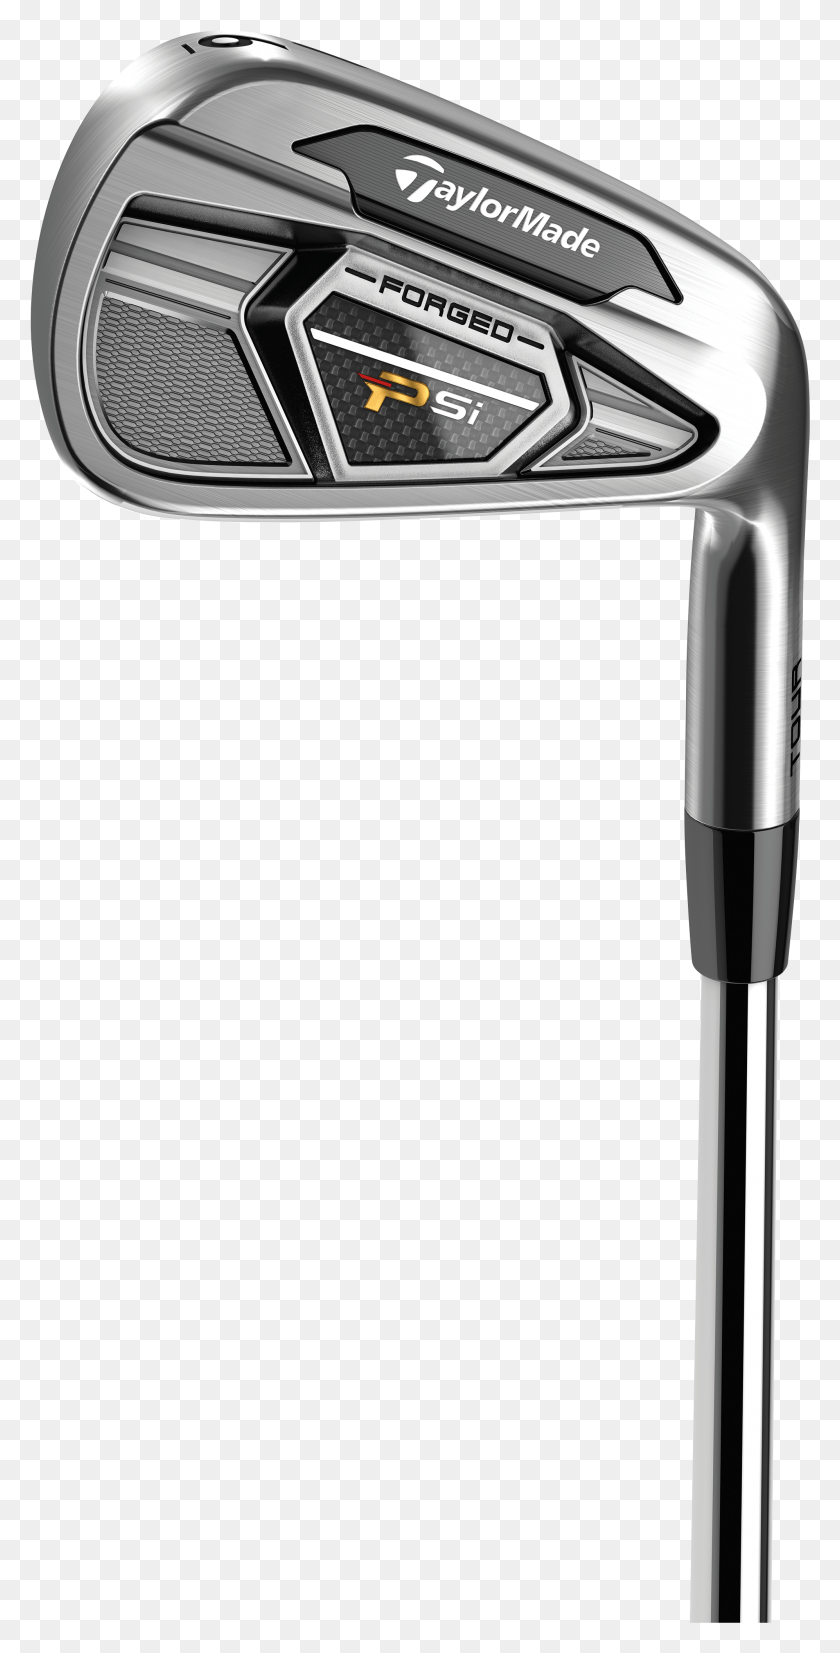 1994x4073 View Details Image Taylormade Psi Tour Irons, Golf Club, Golf, Sport HD PNG Download